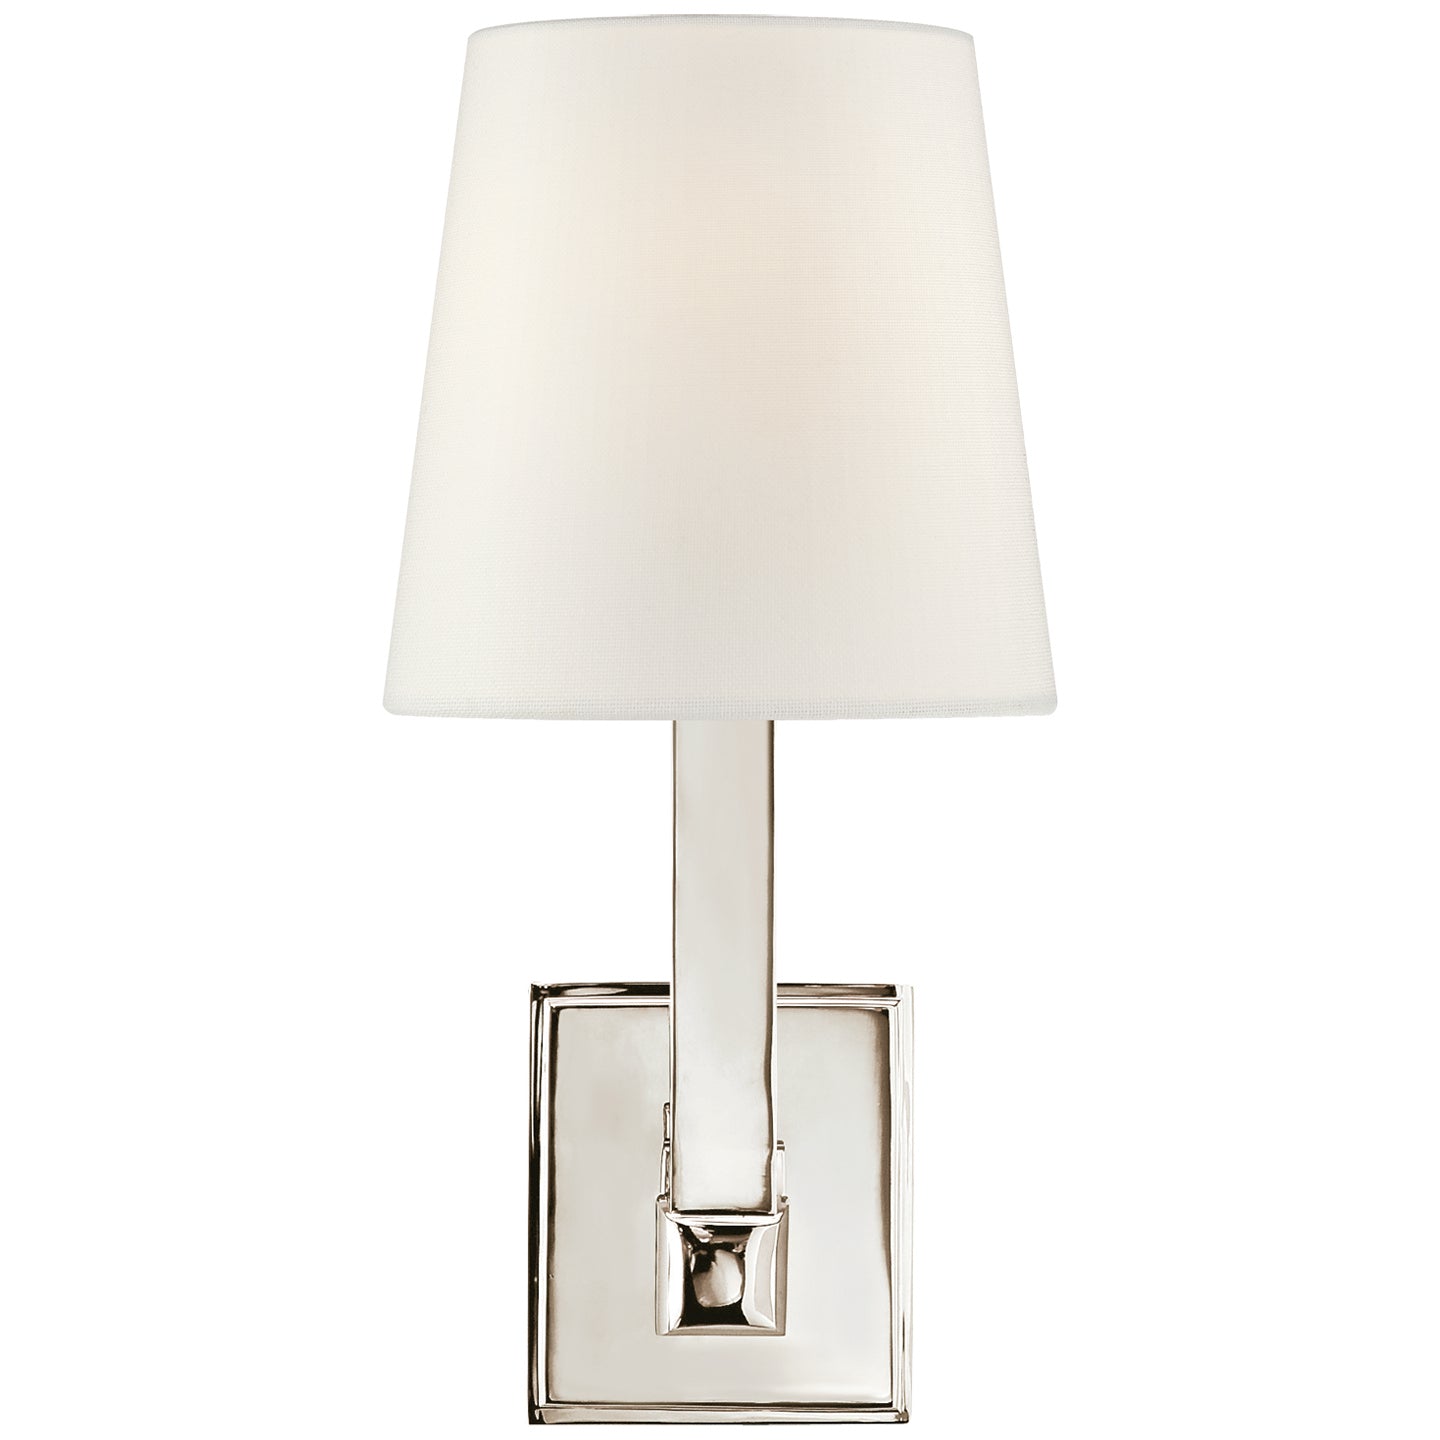 Visual Comfort Signature - SL 2819PN-L - One Light Wall Sconce - Square Tube - Polished Nickel